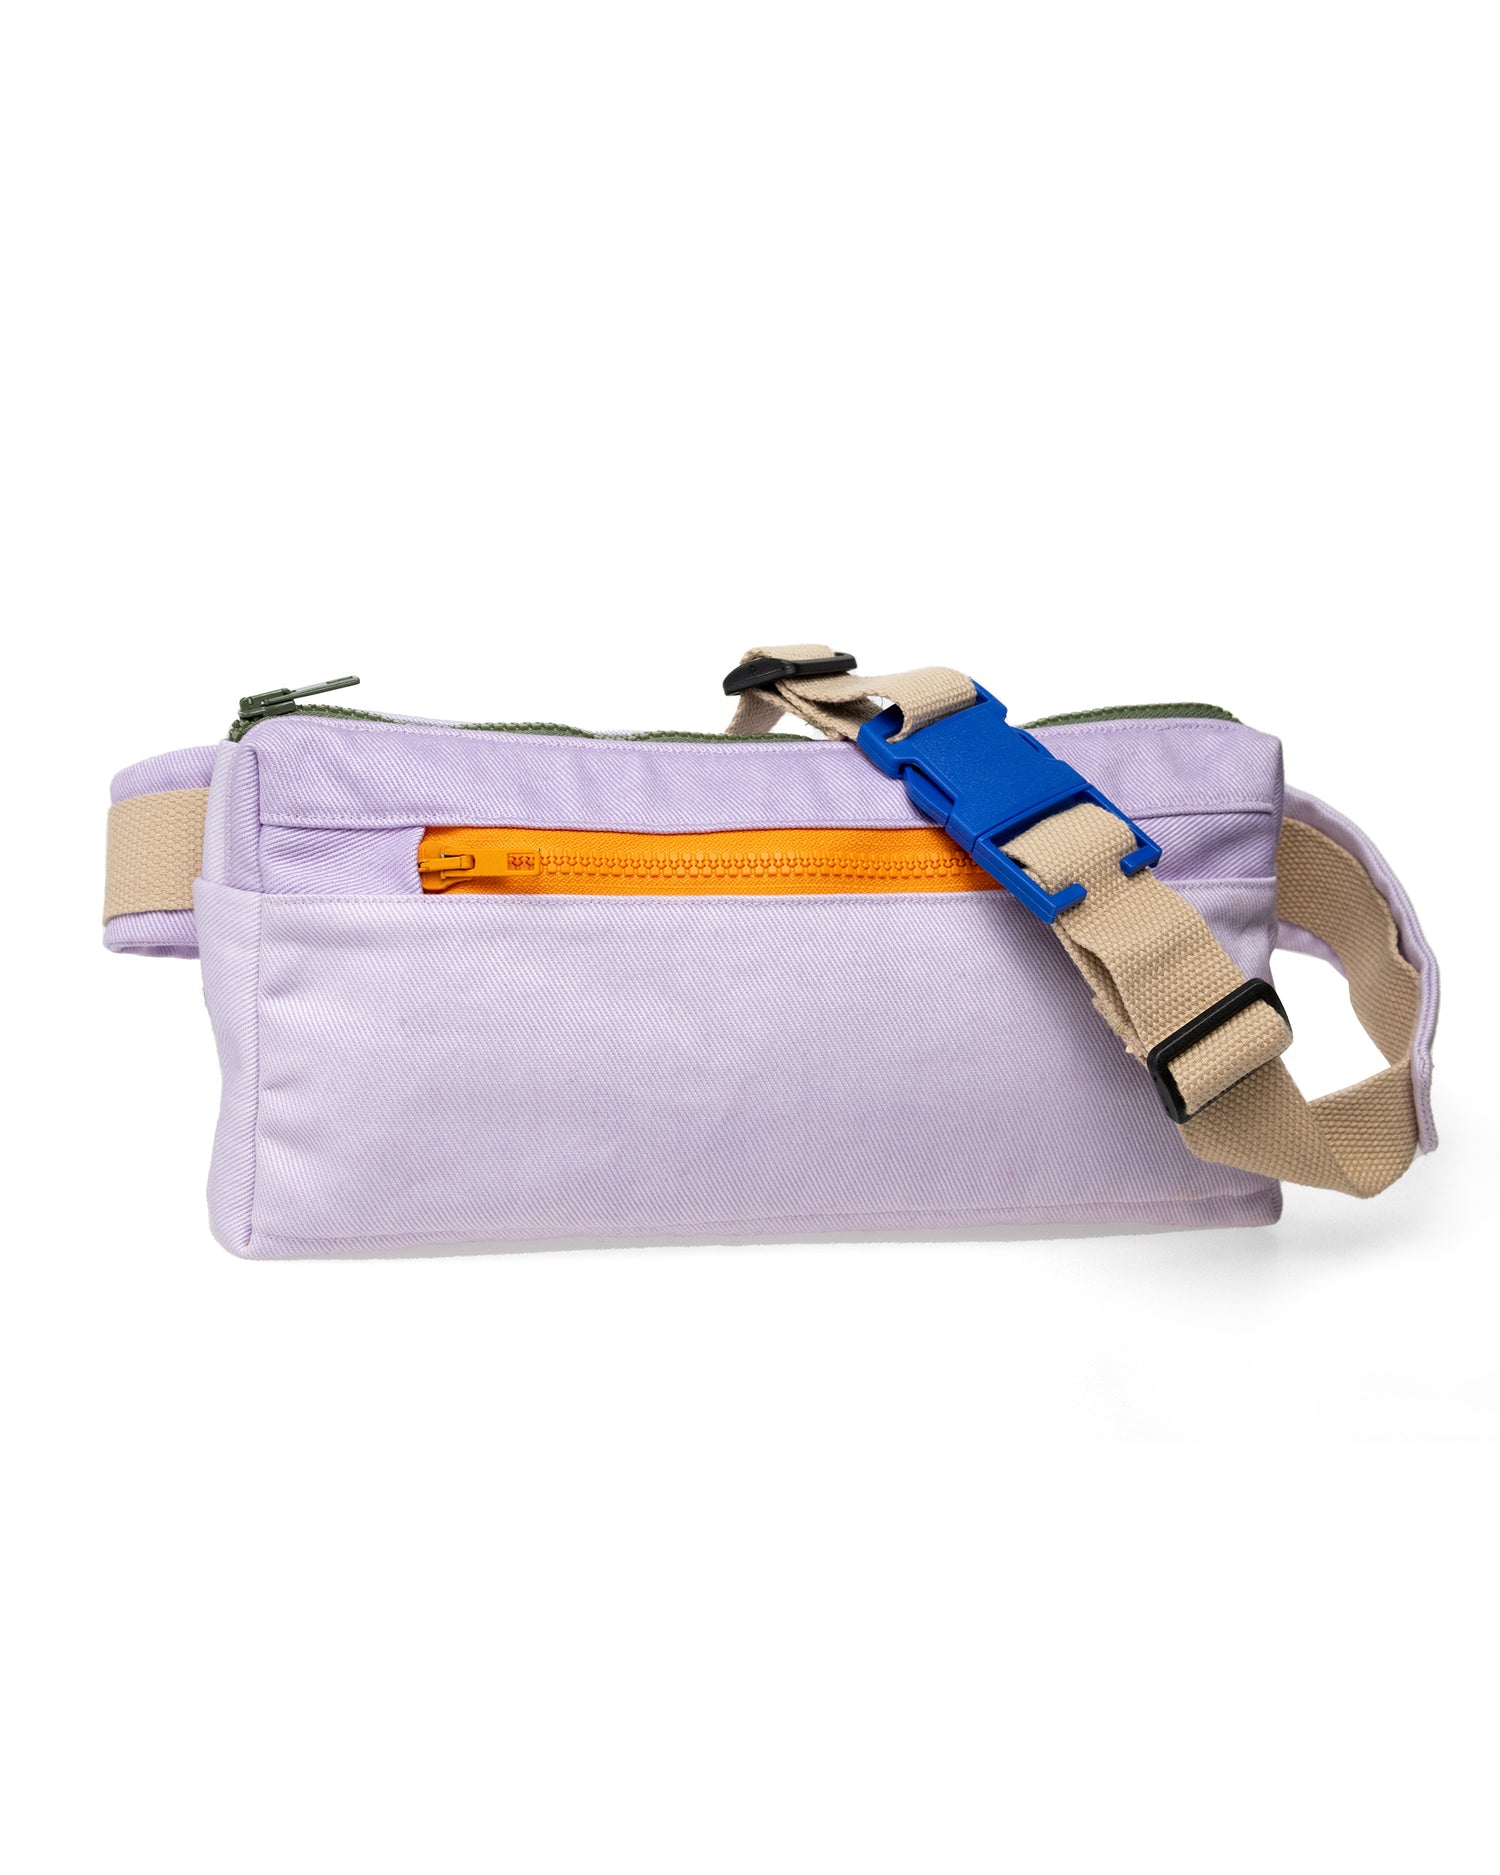 Bumbag made from reclaimed canvas in lavender with an orange zipper and a large blue buckle